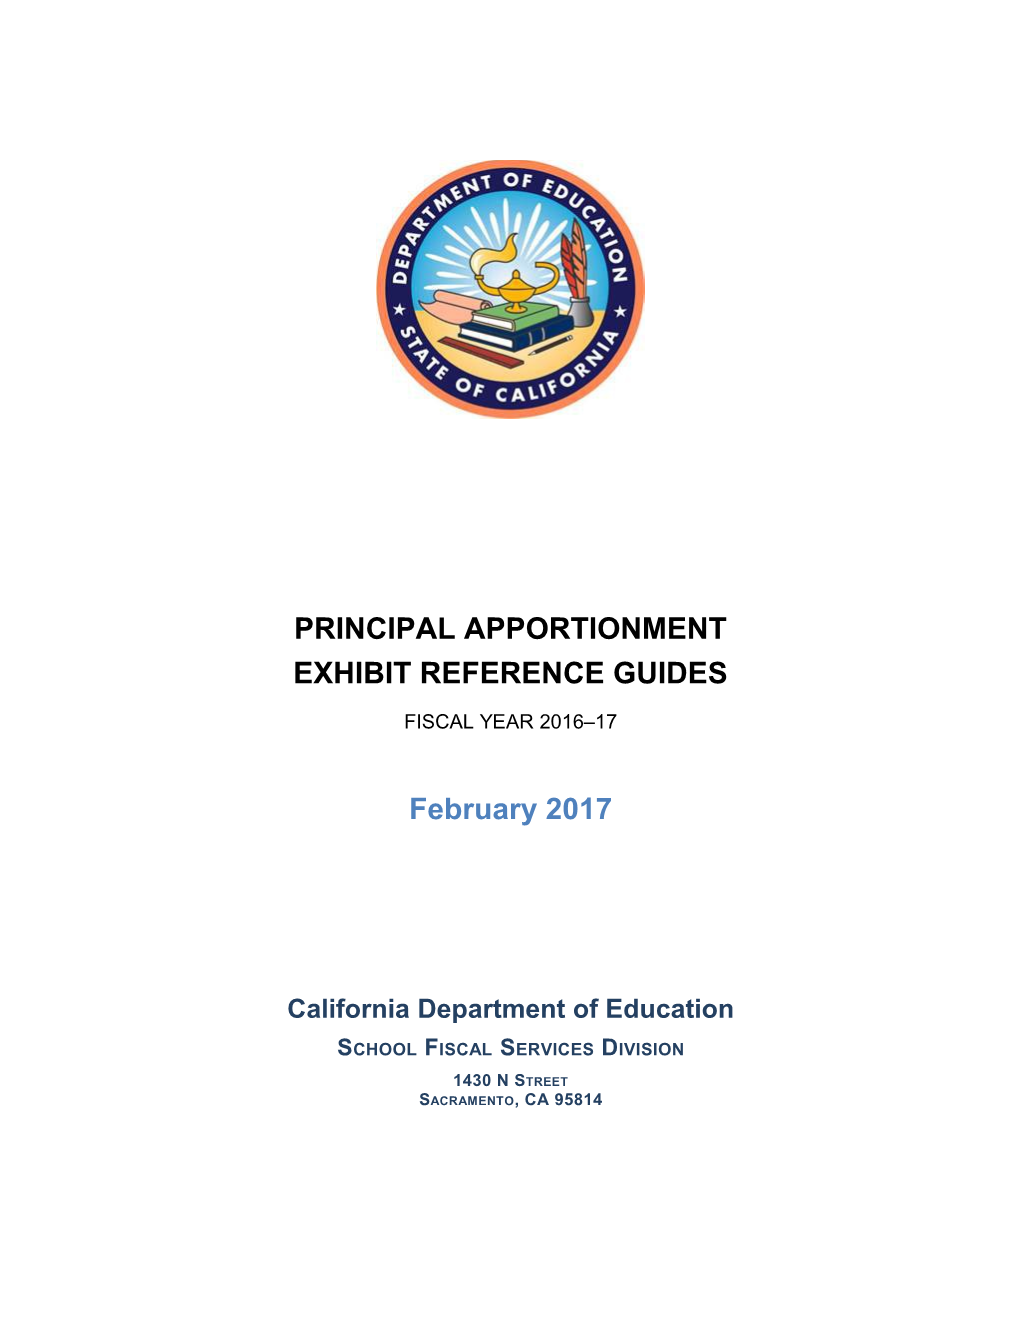 Exhibit Reference Guide, FY 2016-17 - Principal Apportionment (CA Dept of Education)